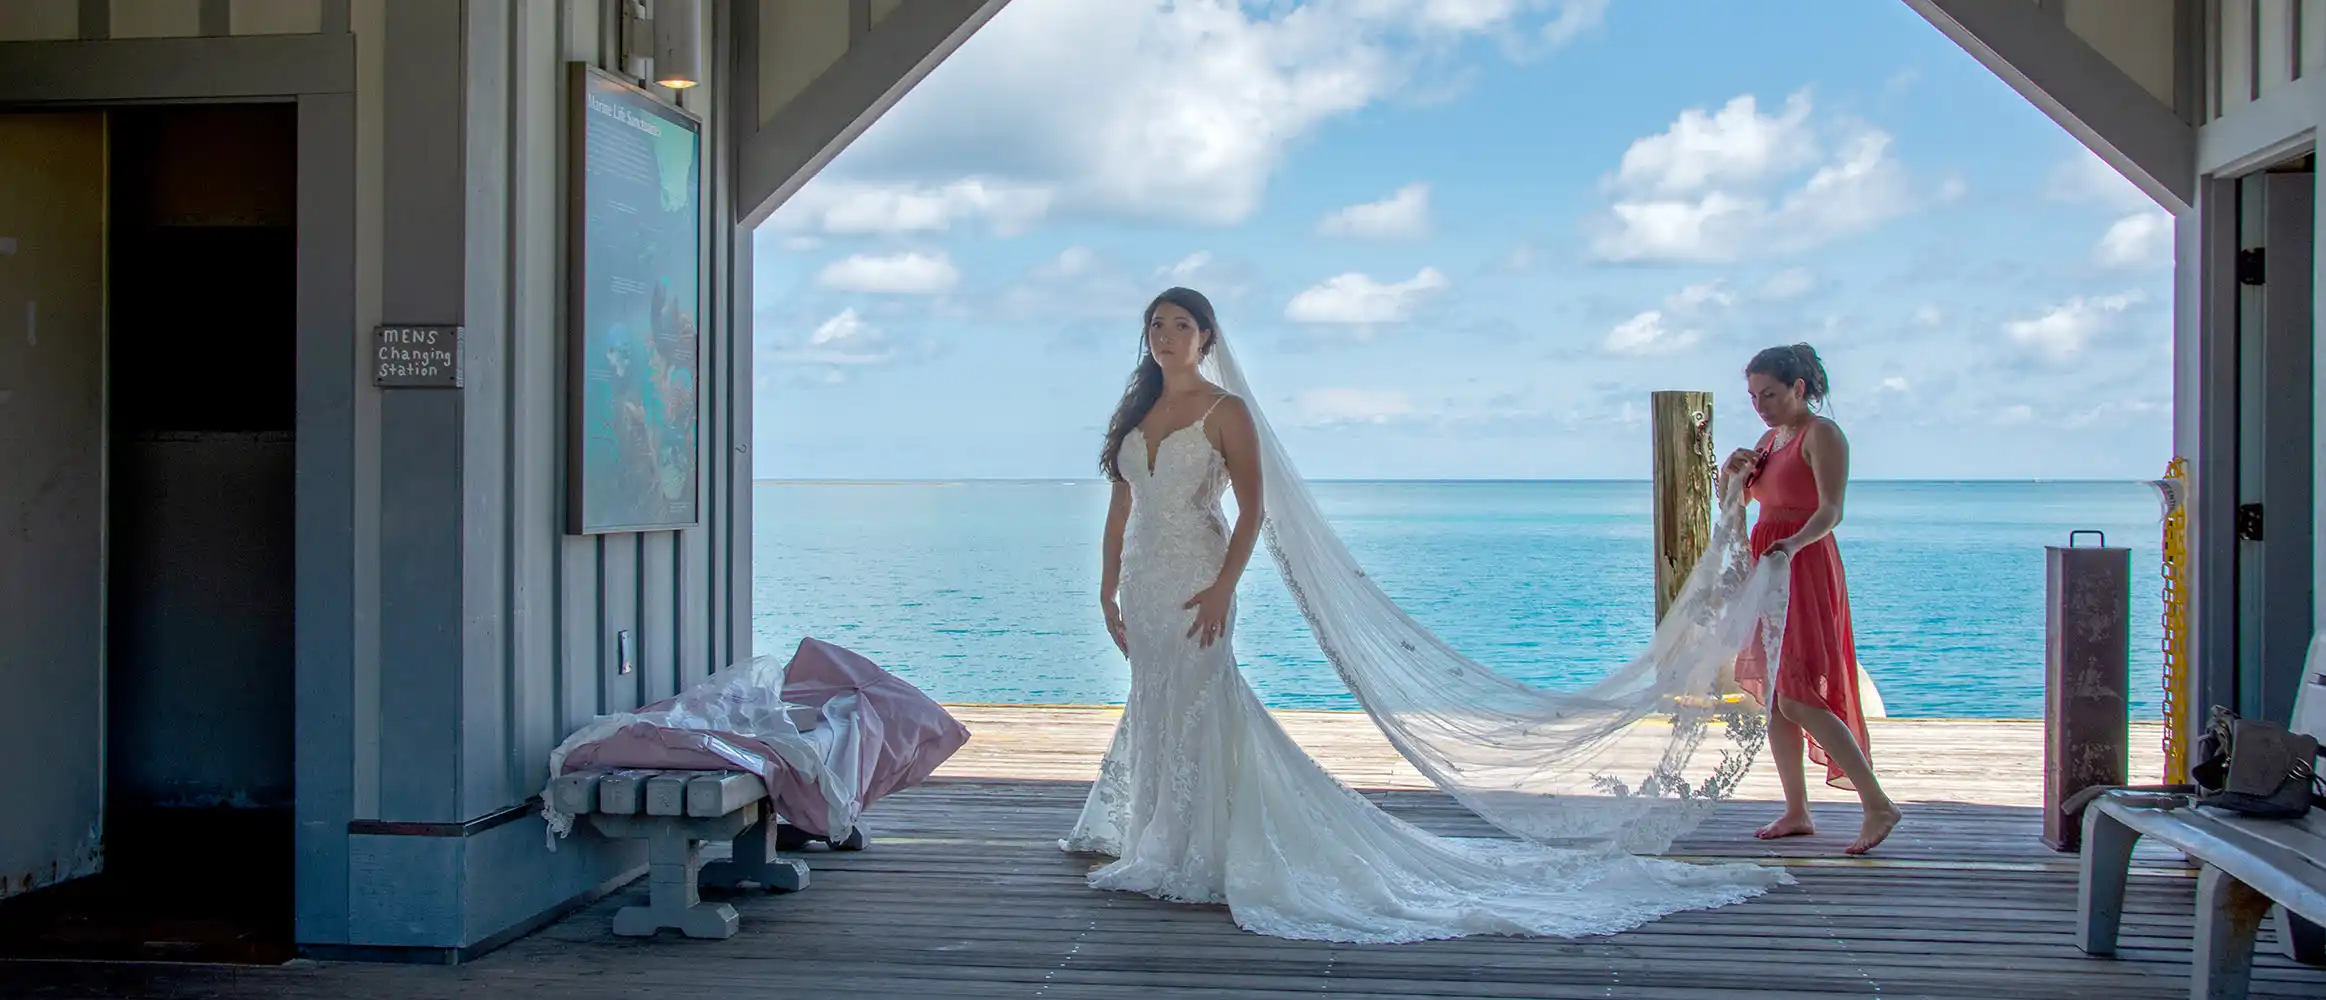 A bride and her bridesmaid are standing on a dock near the ocean for their Key West wedding.